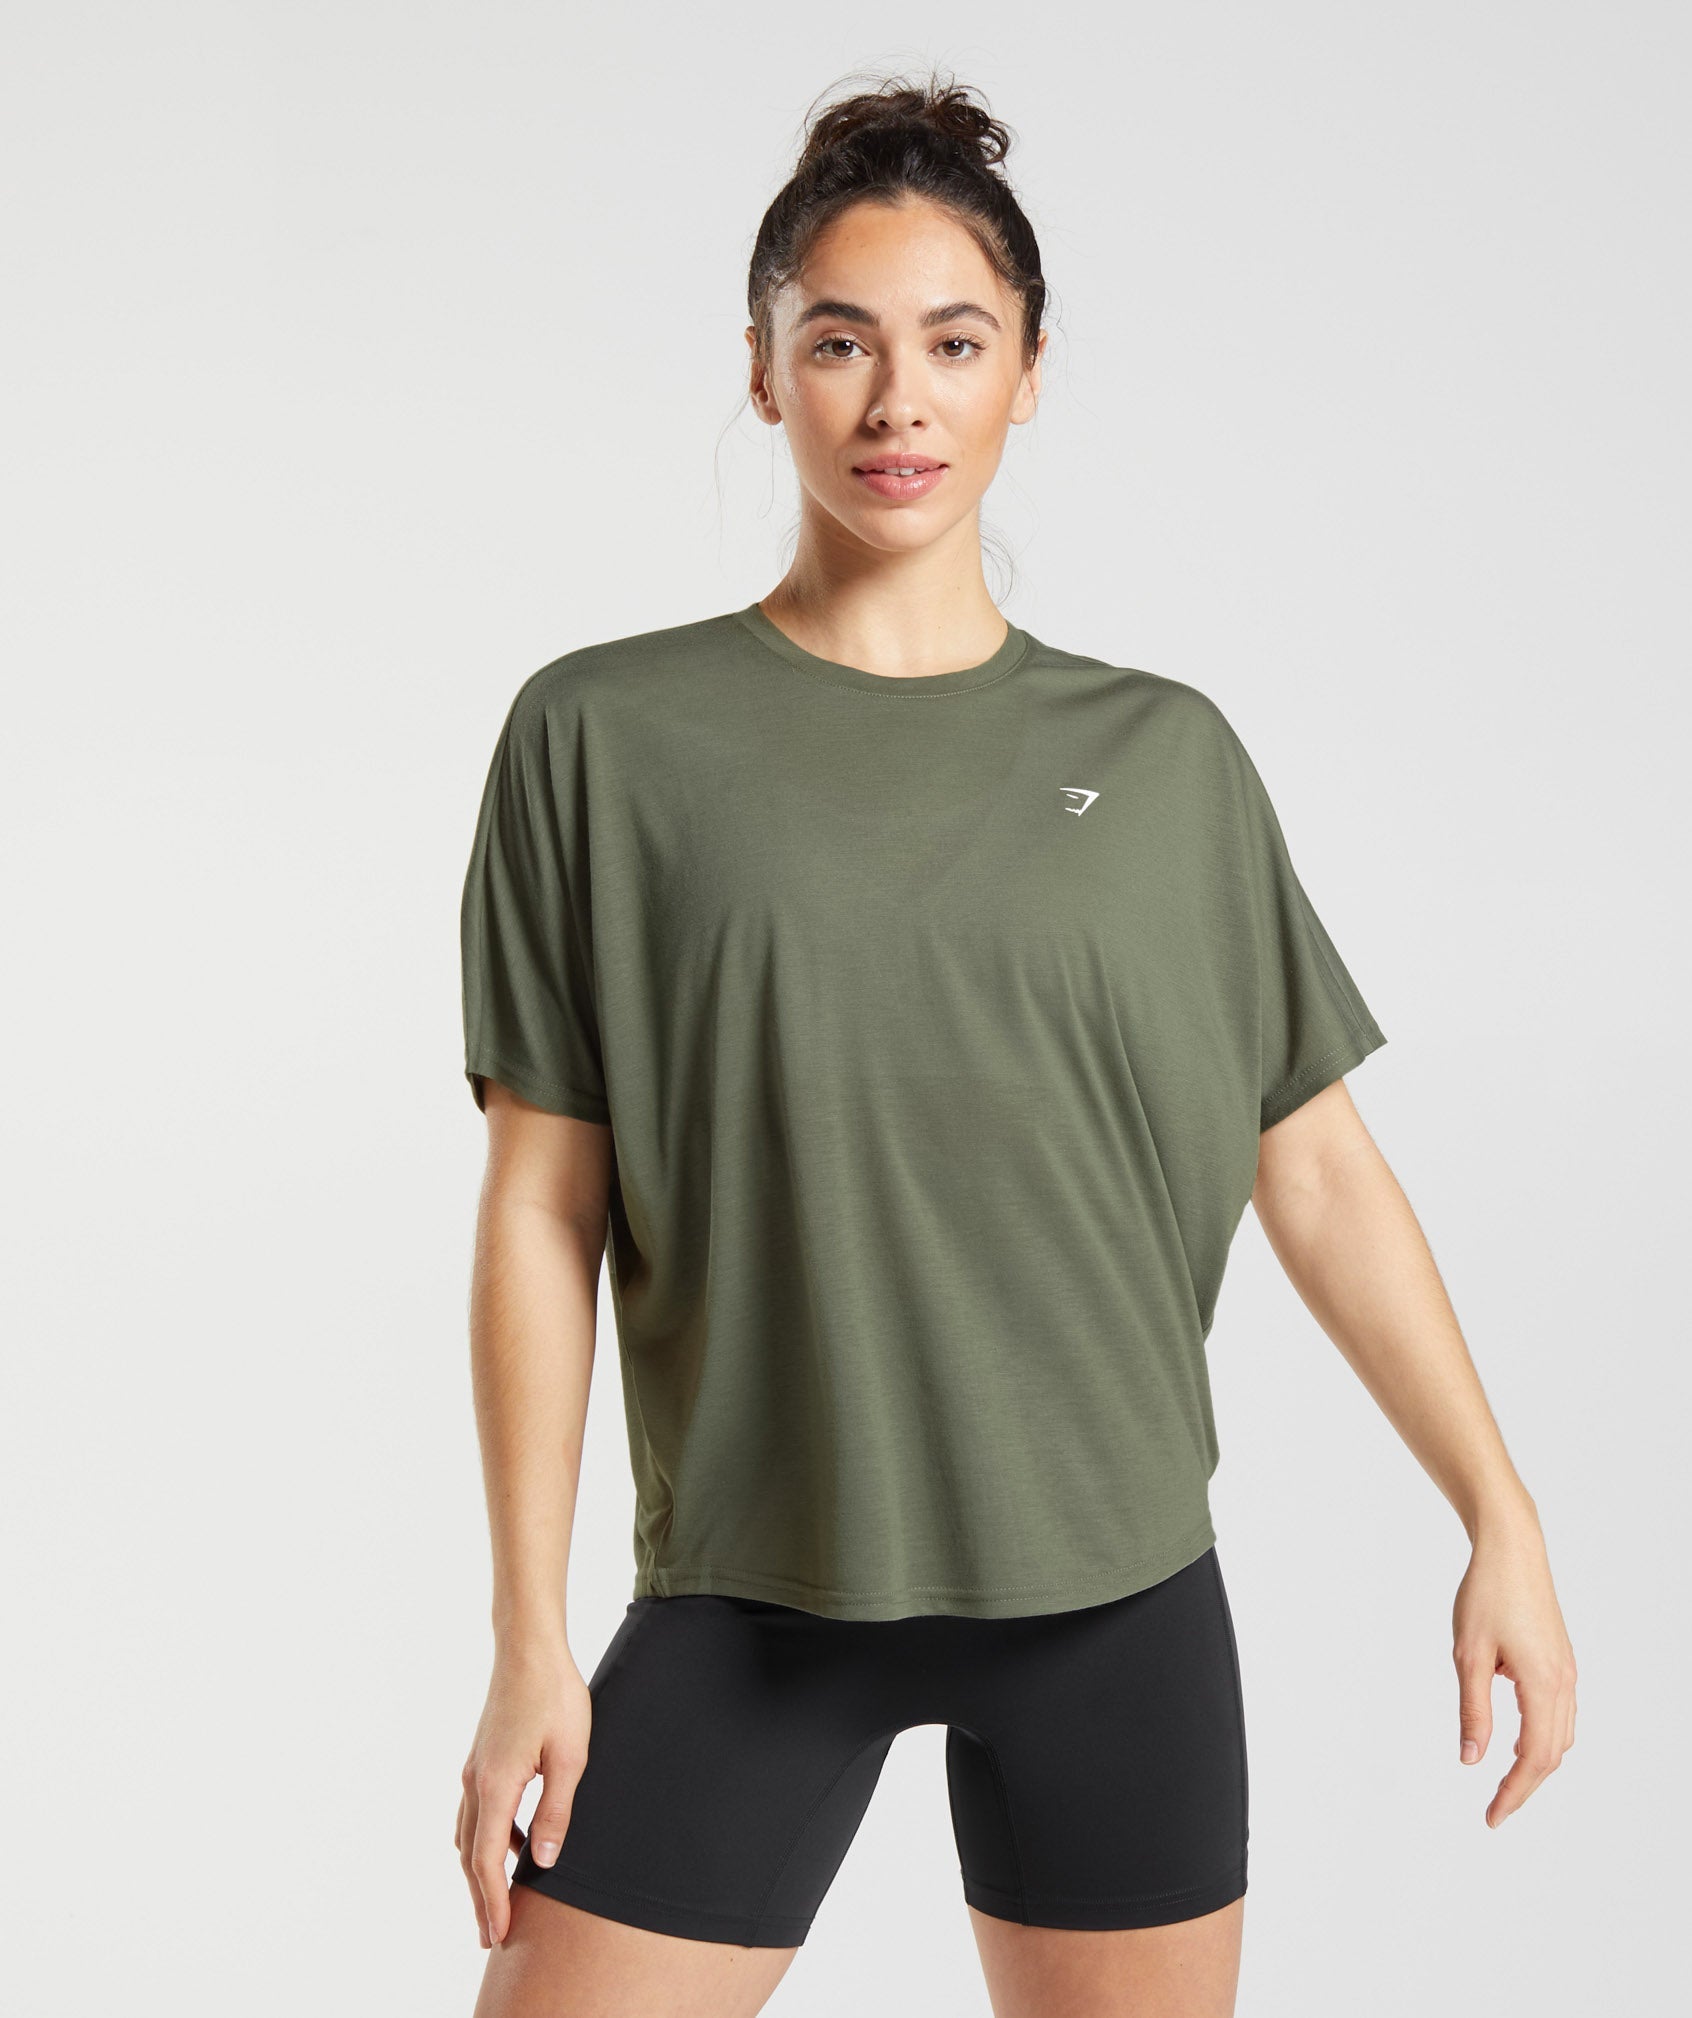 Super Soft T-Shirt in Dusty Olive